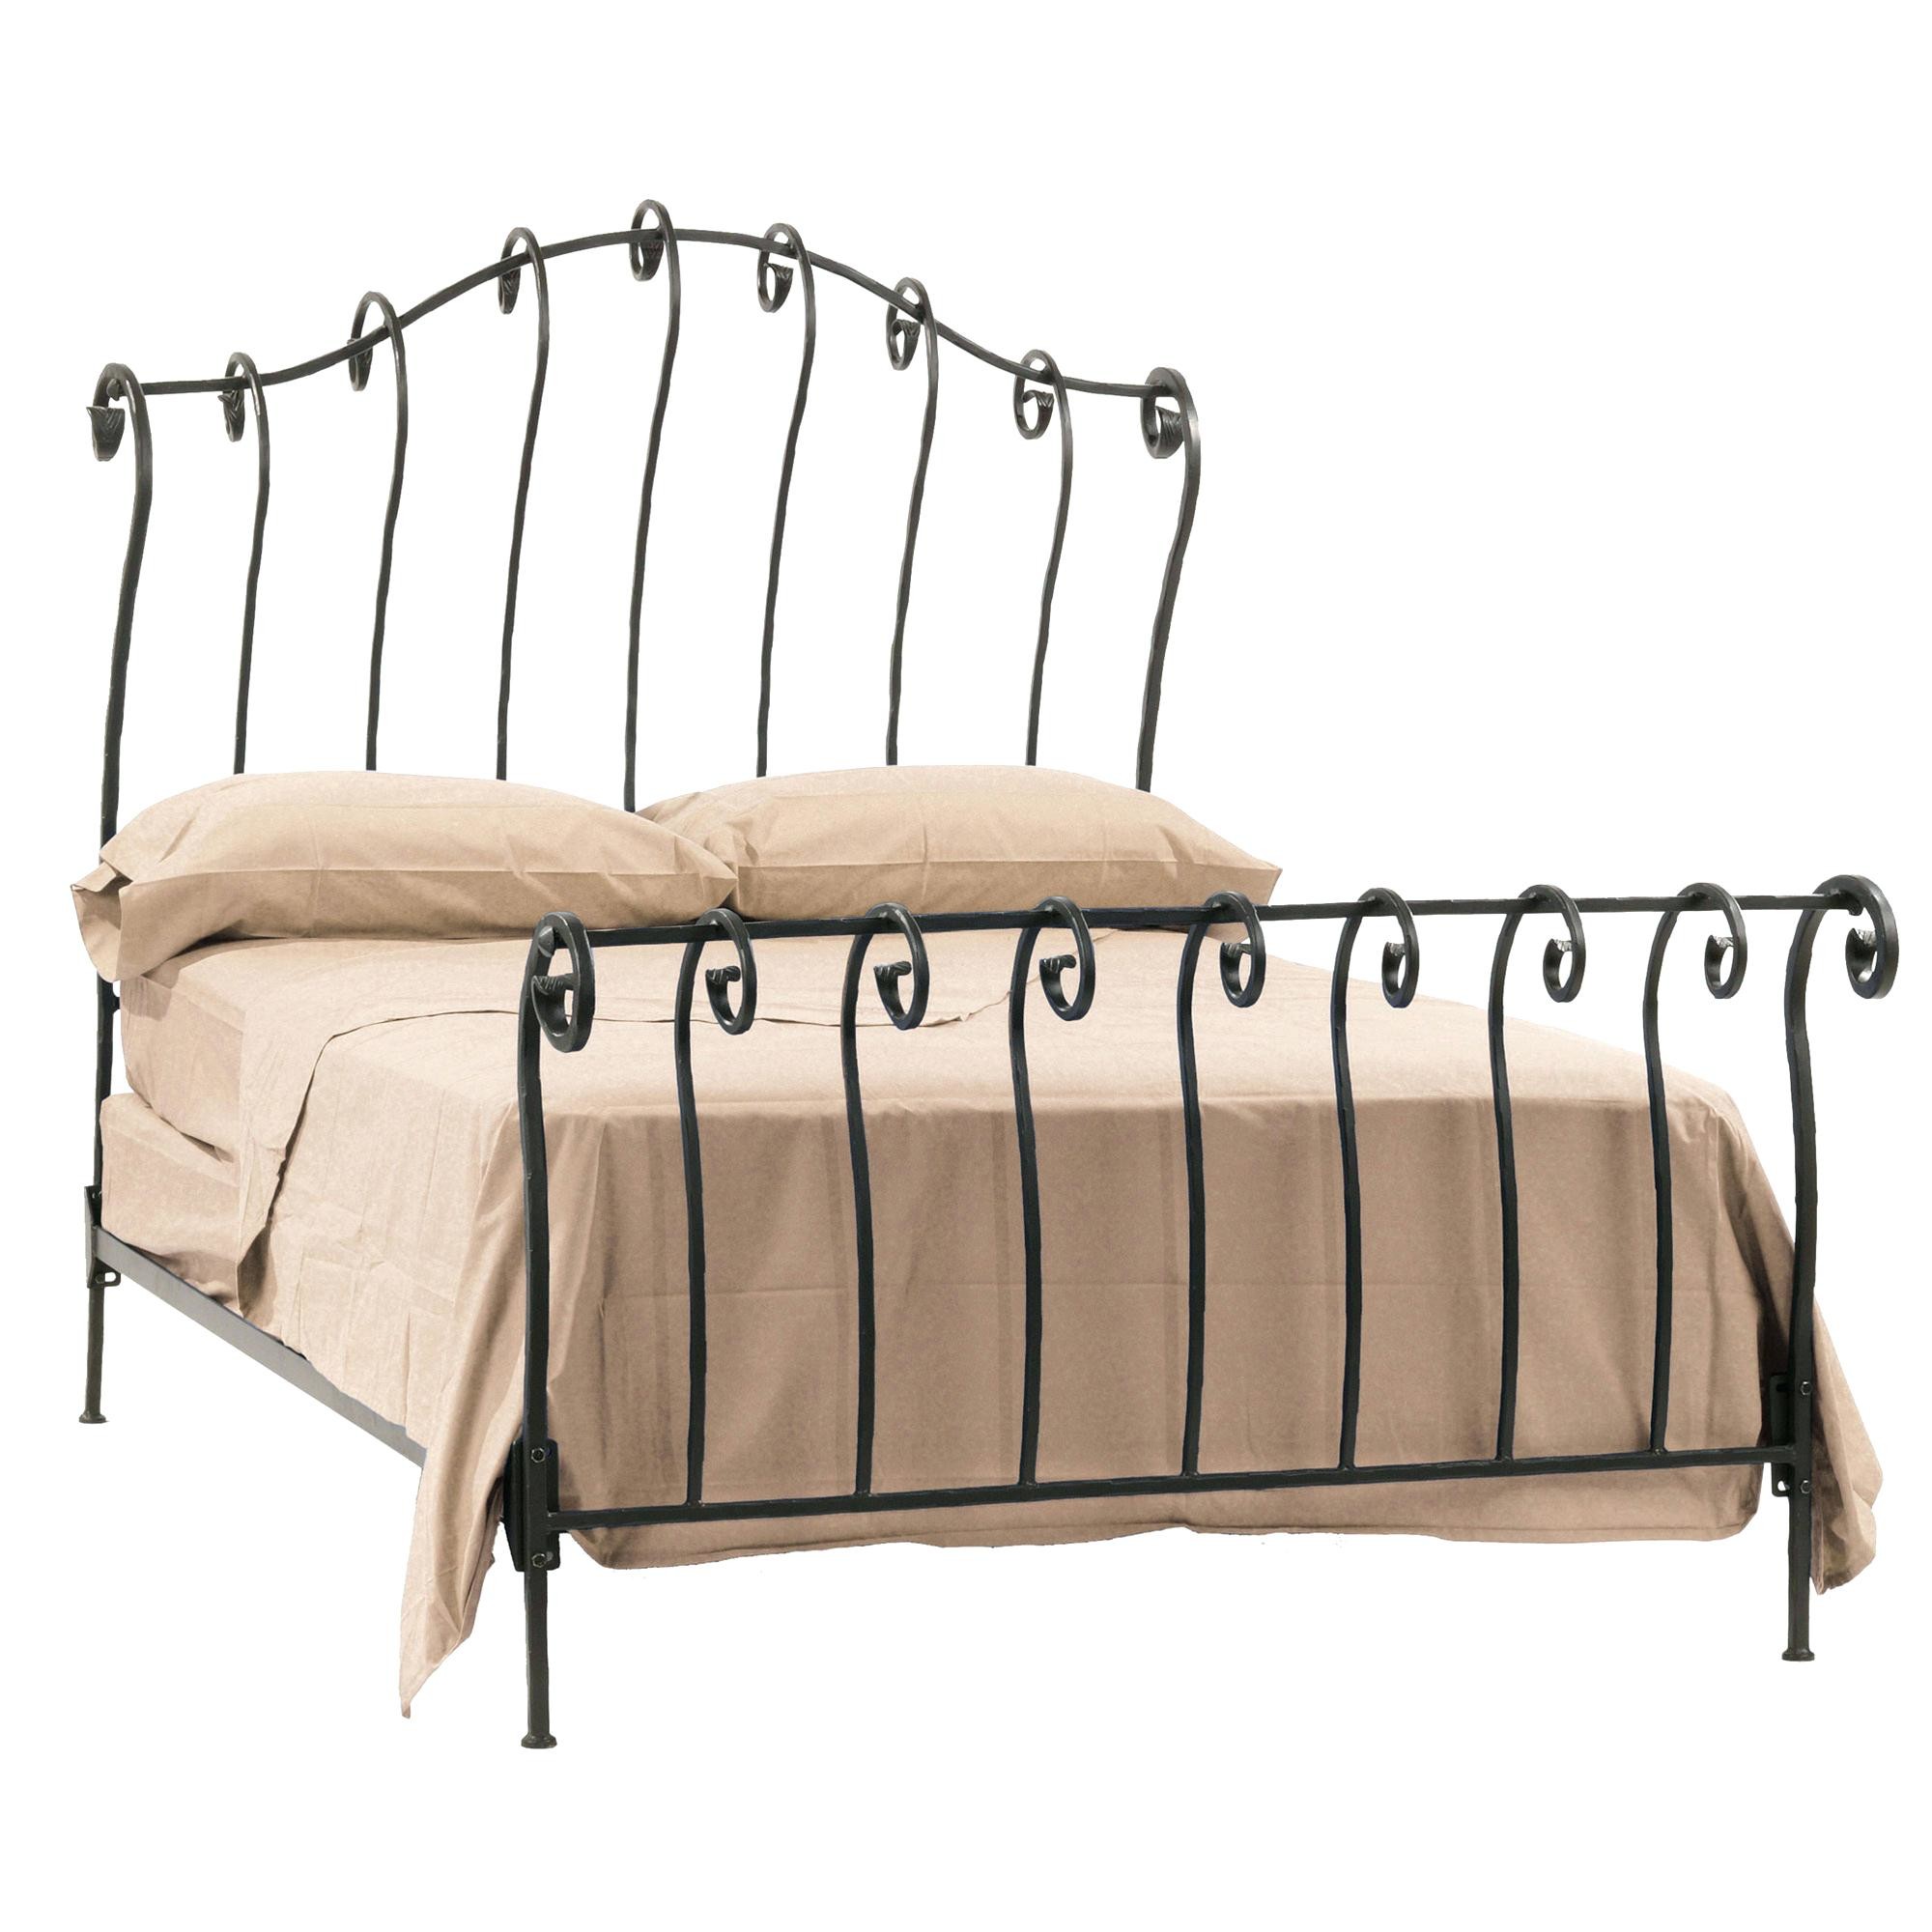 2000x2000 Full Size of Bed Frames Wallpaper:hi-def Meadowcraft Patio Furniture Iron  California King Large Size of Bed Frames Wallpaper:hi-def Meadowcraft Patio  ...